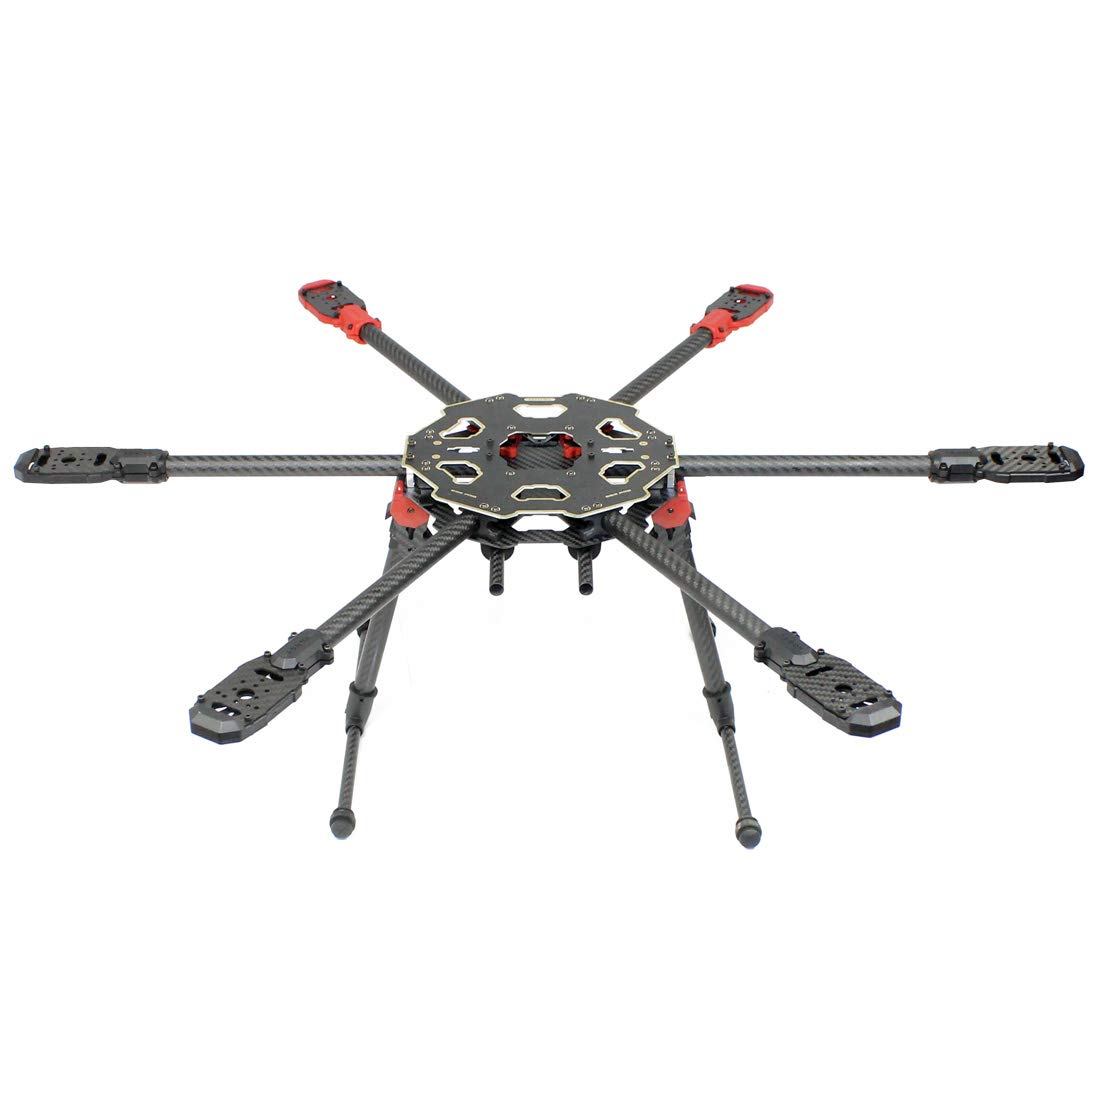 TAROT 680PRO Six-axis Folding Hexacopter Aircraft Frame Kit TL68P00 695MM 6-Axis Airframe for DIY Drone